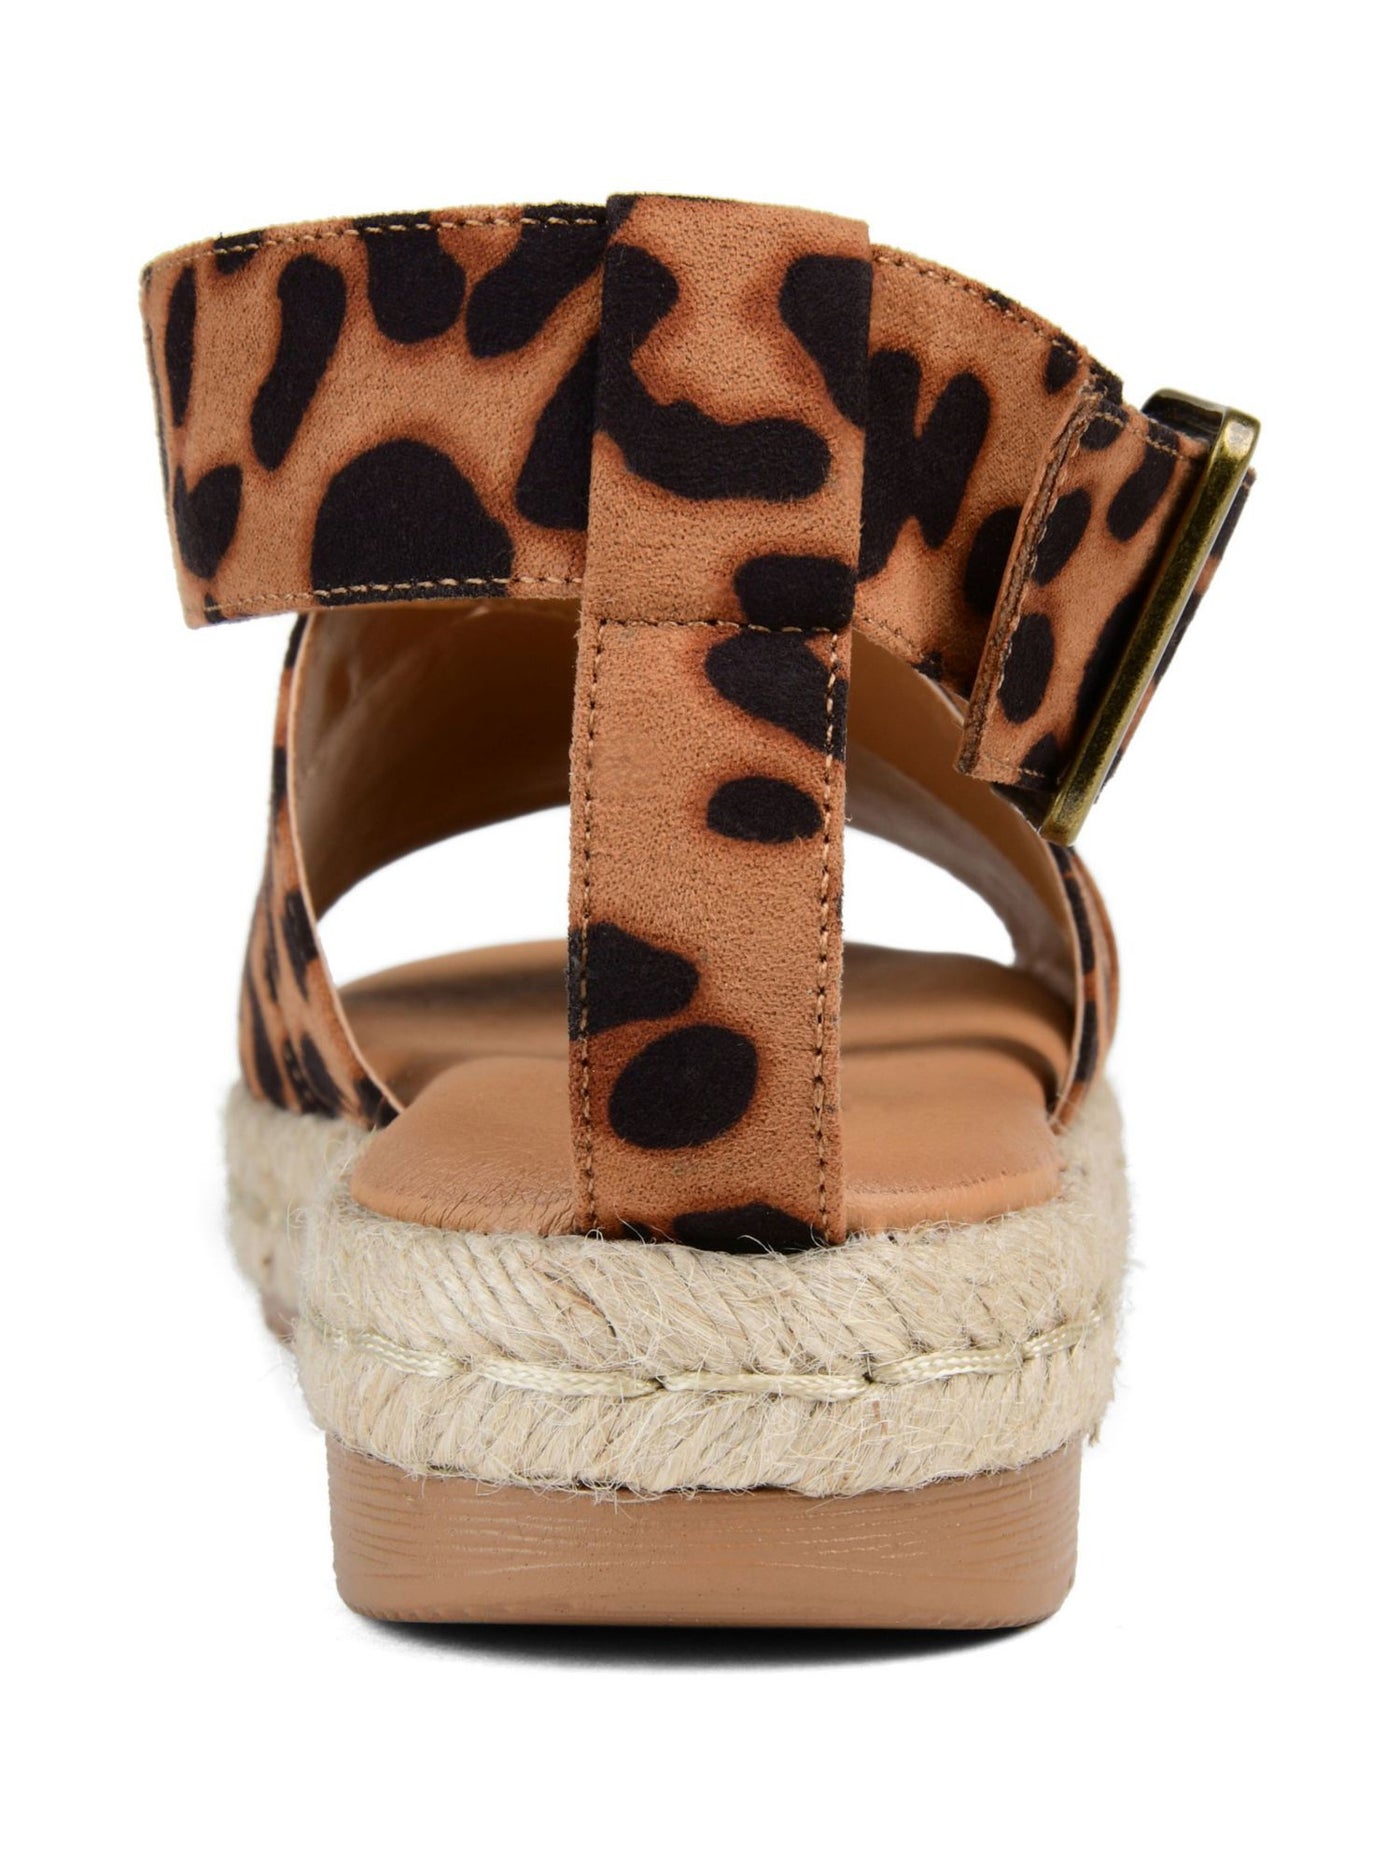 JOURNEE COLLECTION Womens Brown Animal Print Strappy Padded Trinity Round Toe Platform Buckle Espadrille Shoes 8 M